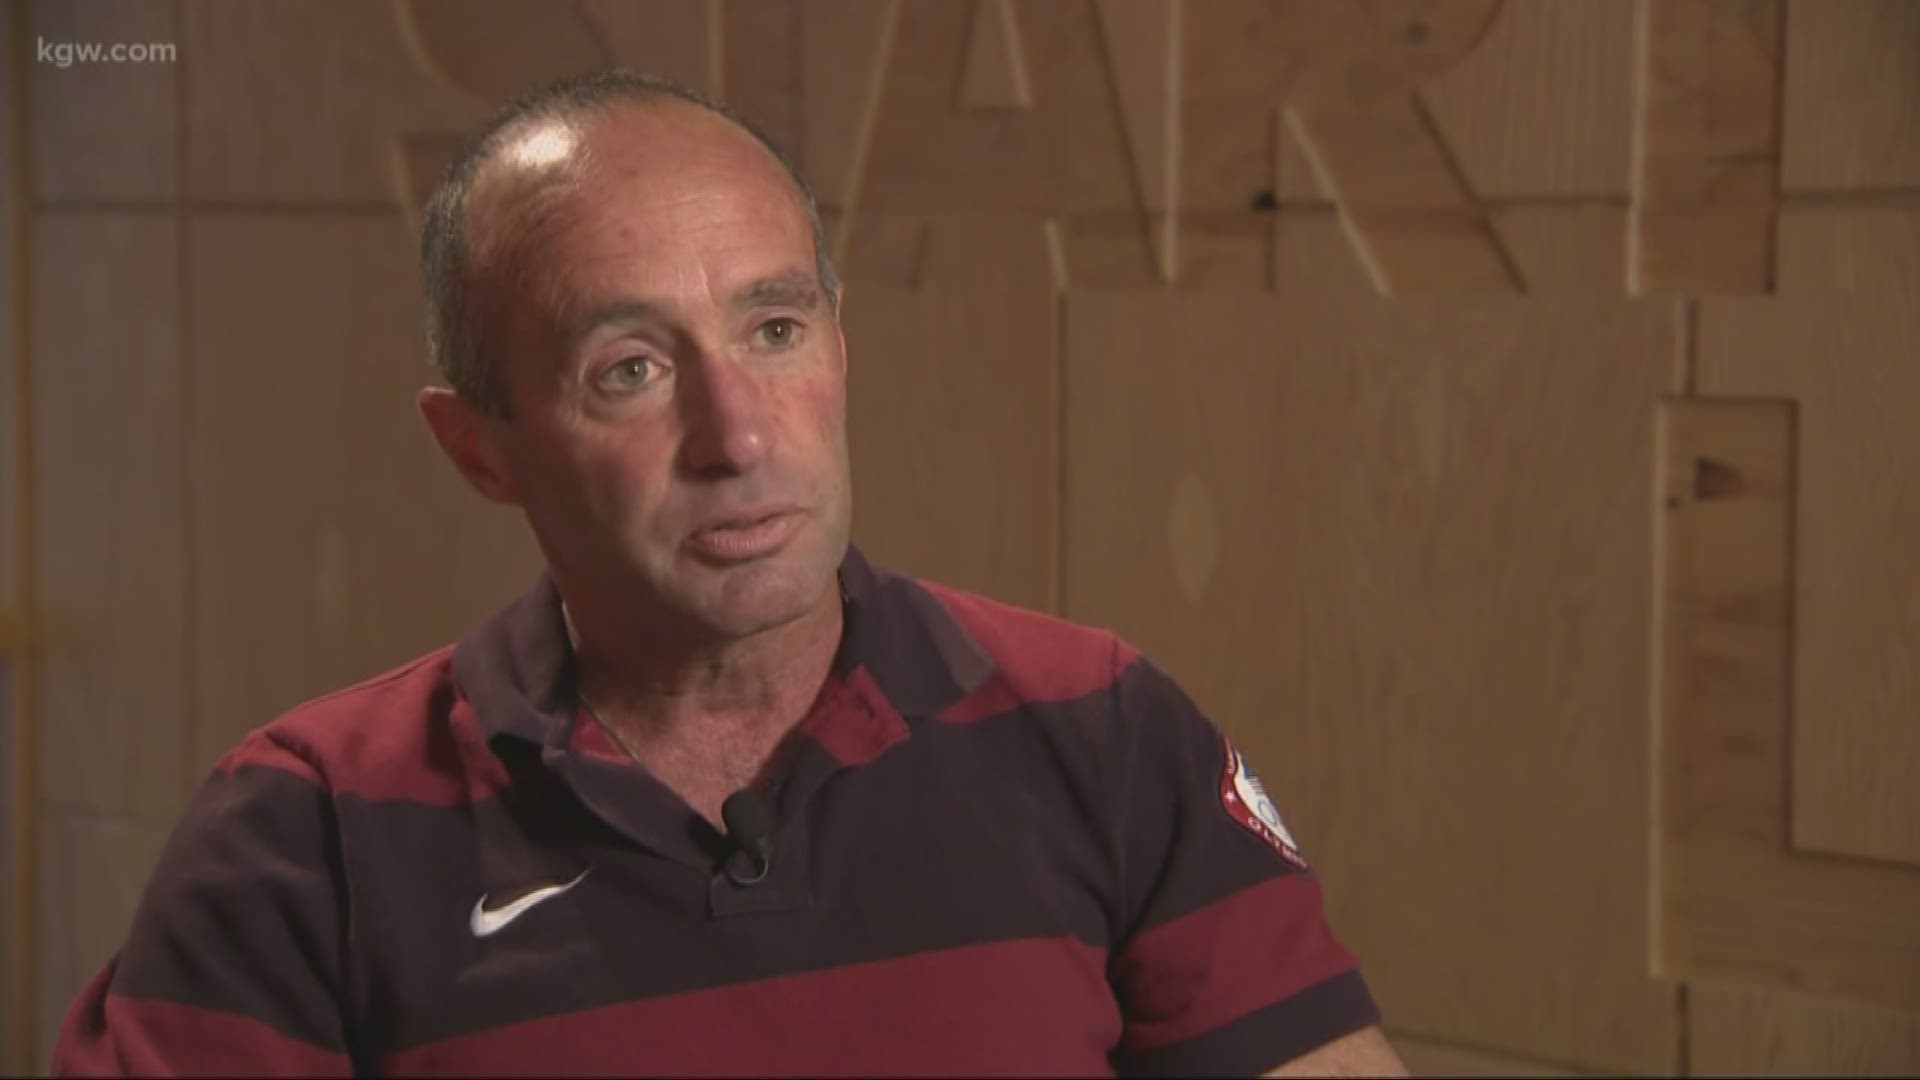 Alberto Salazar was hit with a 4-year ban for doping. The Nike Oregon Project coach has trained some of the world’s top runners.